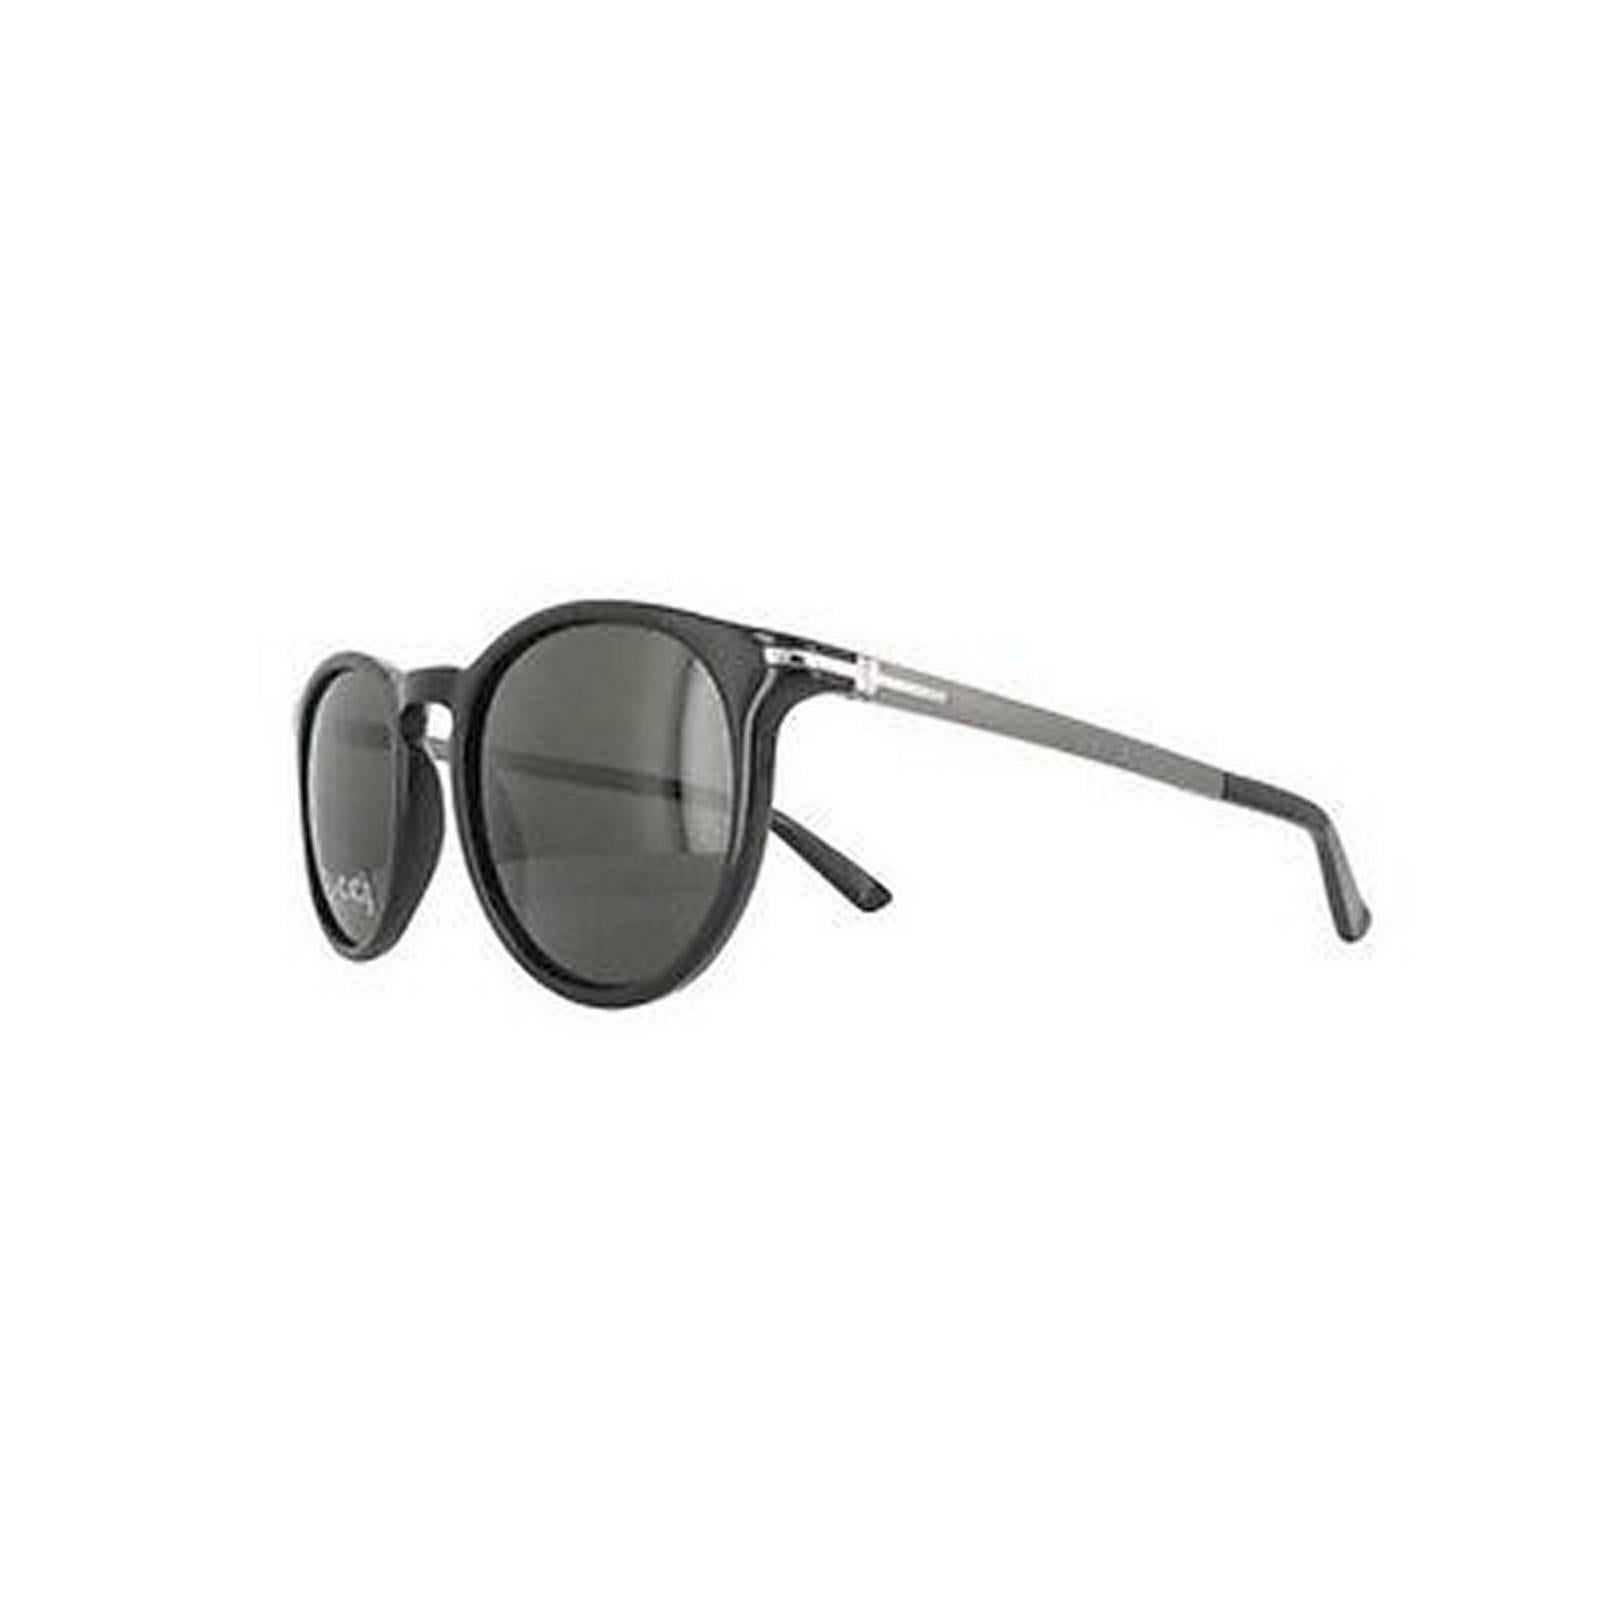 Gucci GG1110S-B2XNR-51 Dark Brown / Black Sunglasses

Frame : Acetate
Brand new with original case and cleaning cloth.
Made in Italy